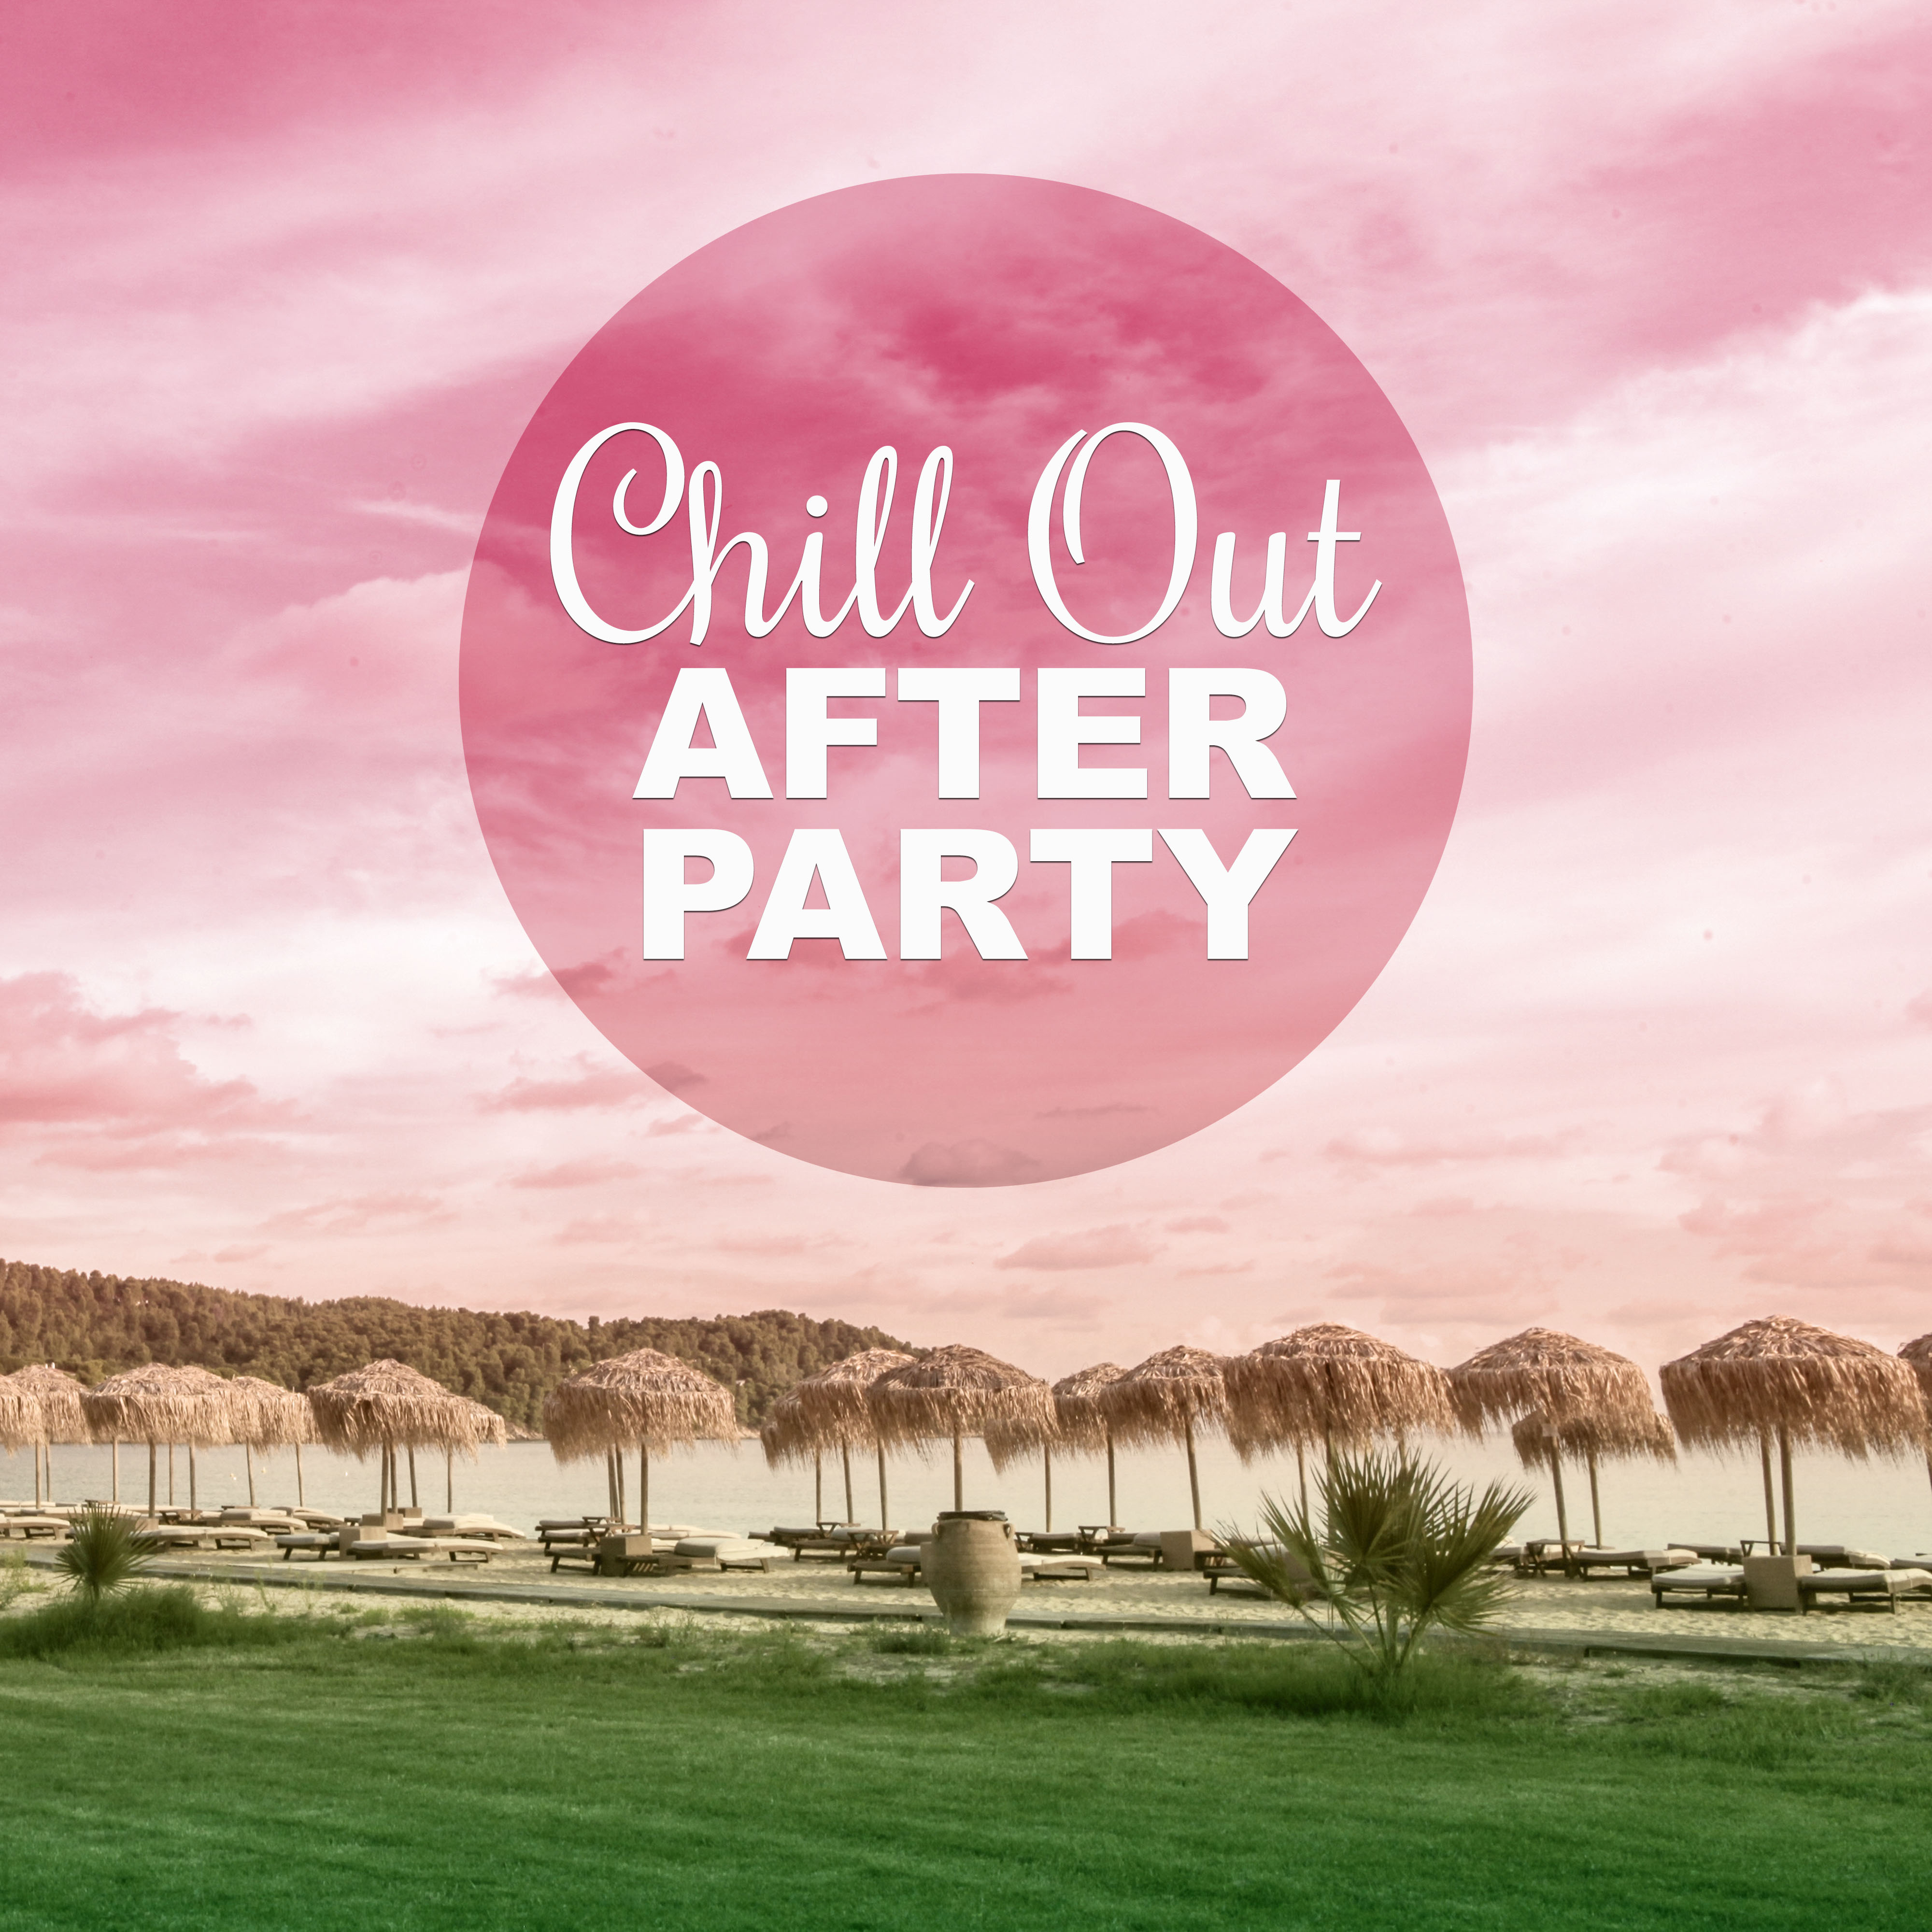 Chill Out After Party  Ibiza Beach Party and Chill Out Music for Relaxation